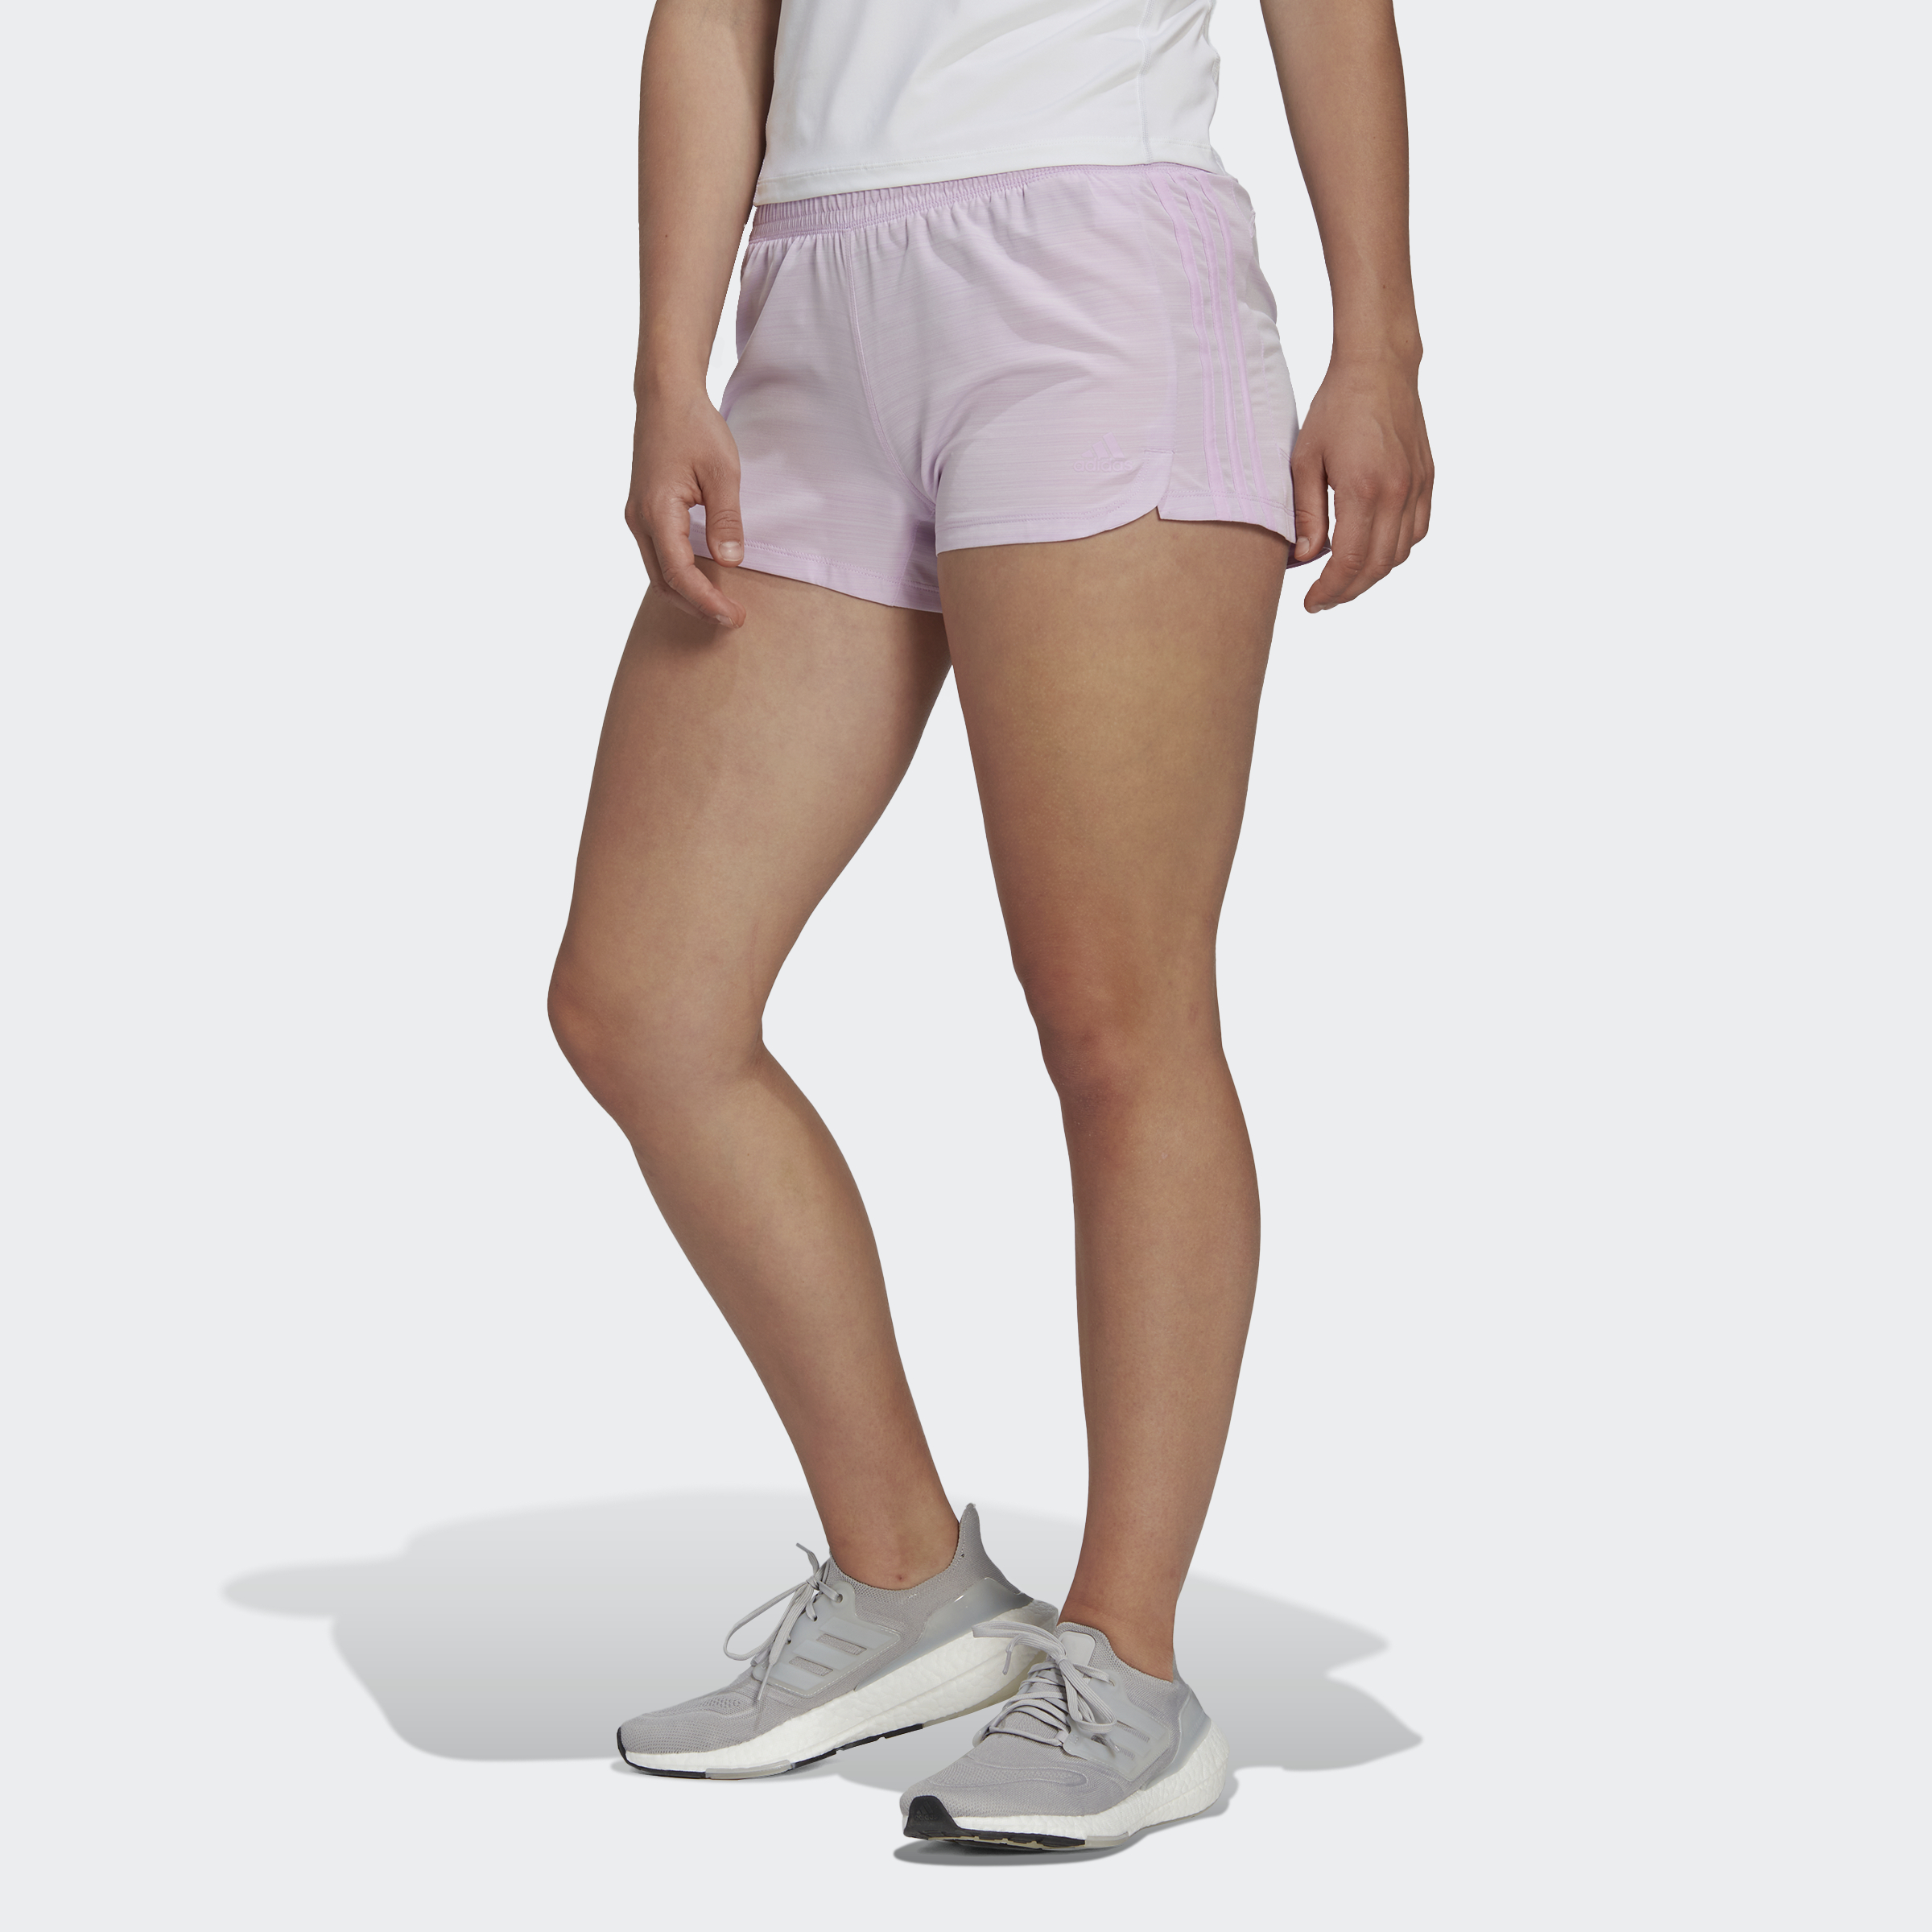 Pacer 3-Stripes Woven Heather Shorts | eBay